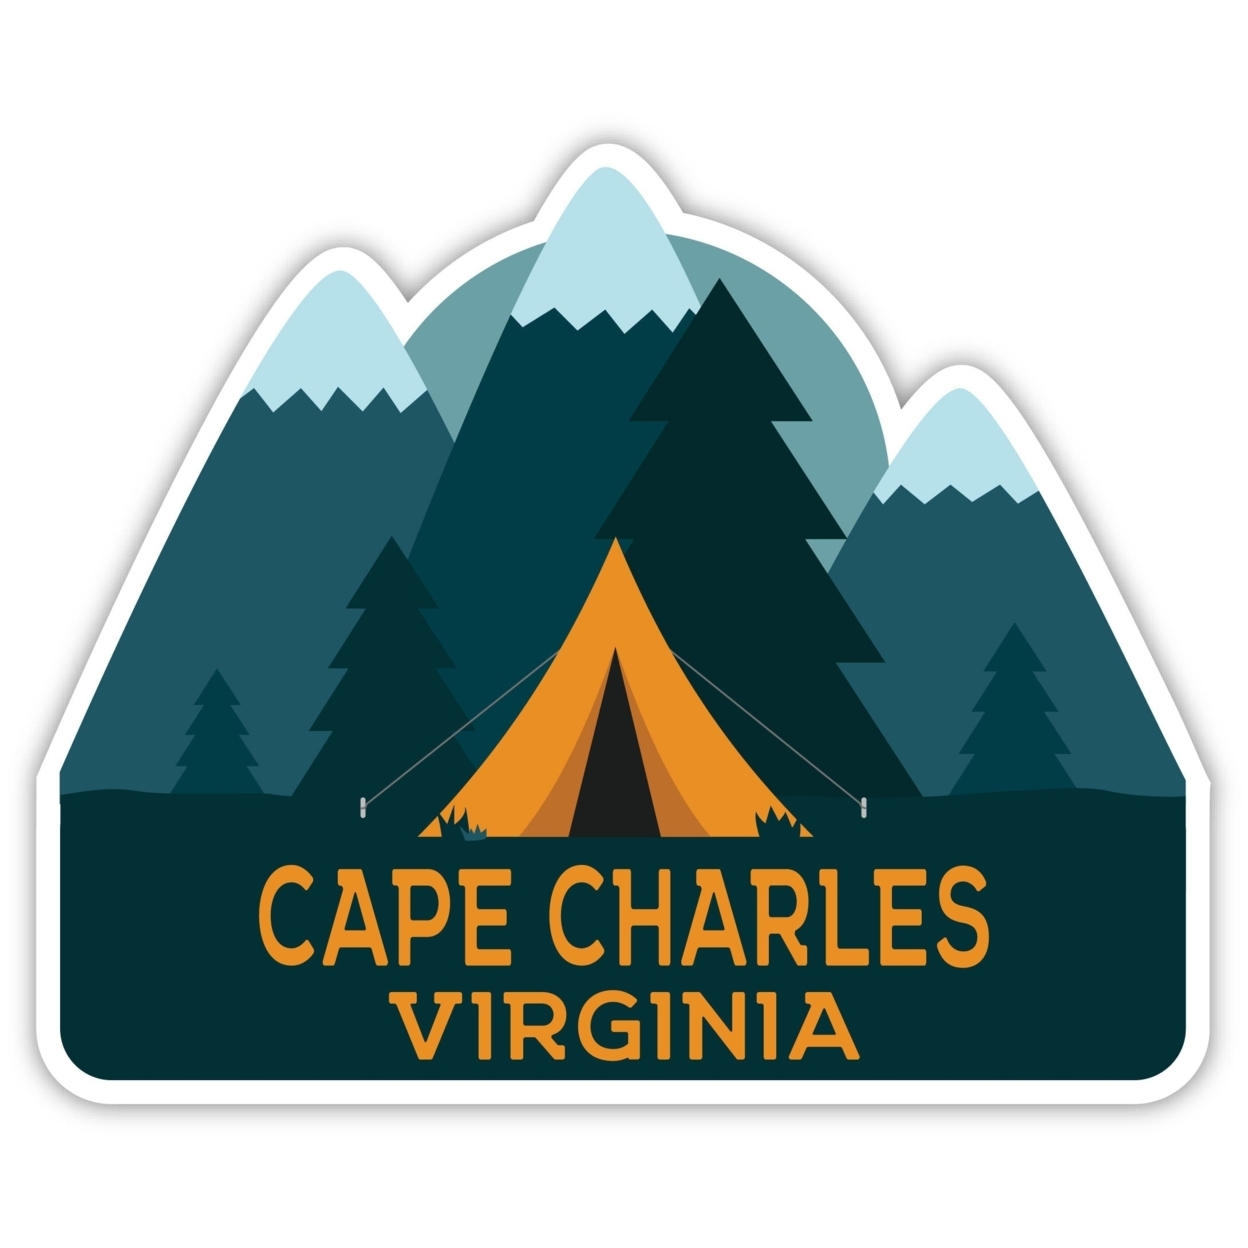 Cape Charles Virginia Souvenir Decorative Stickers (Choose Theme And Size) - 4-Pack, 12-Inch, Tent